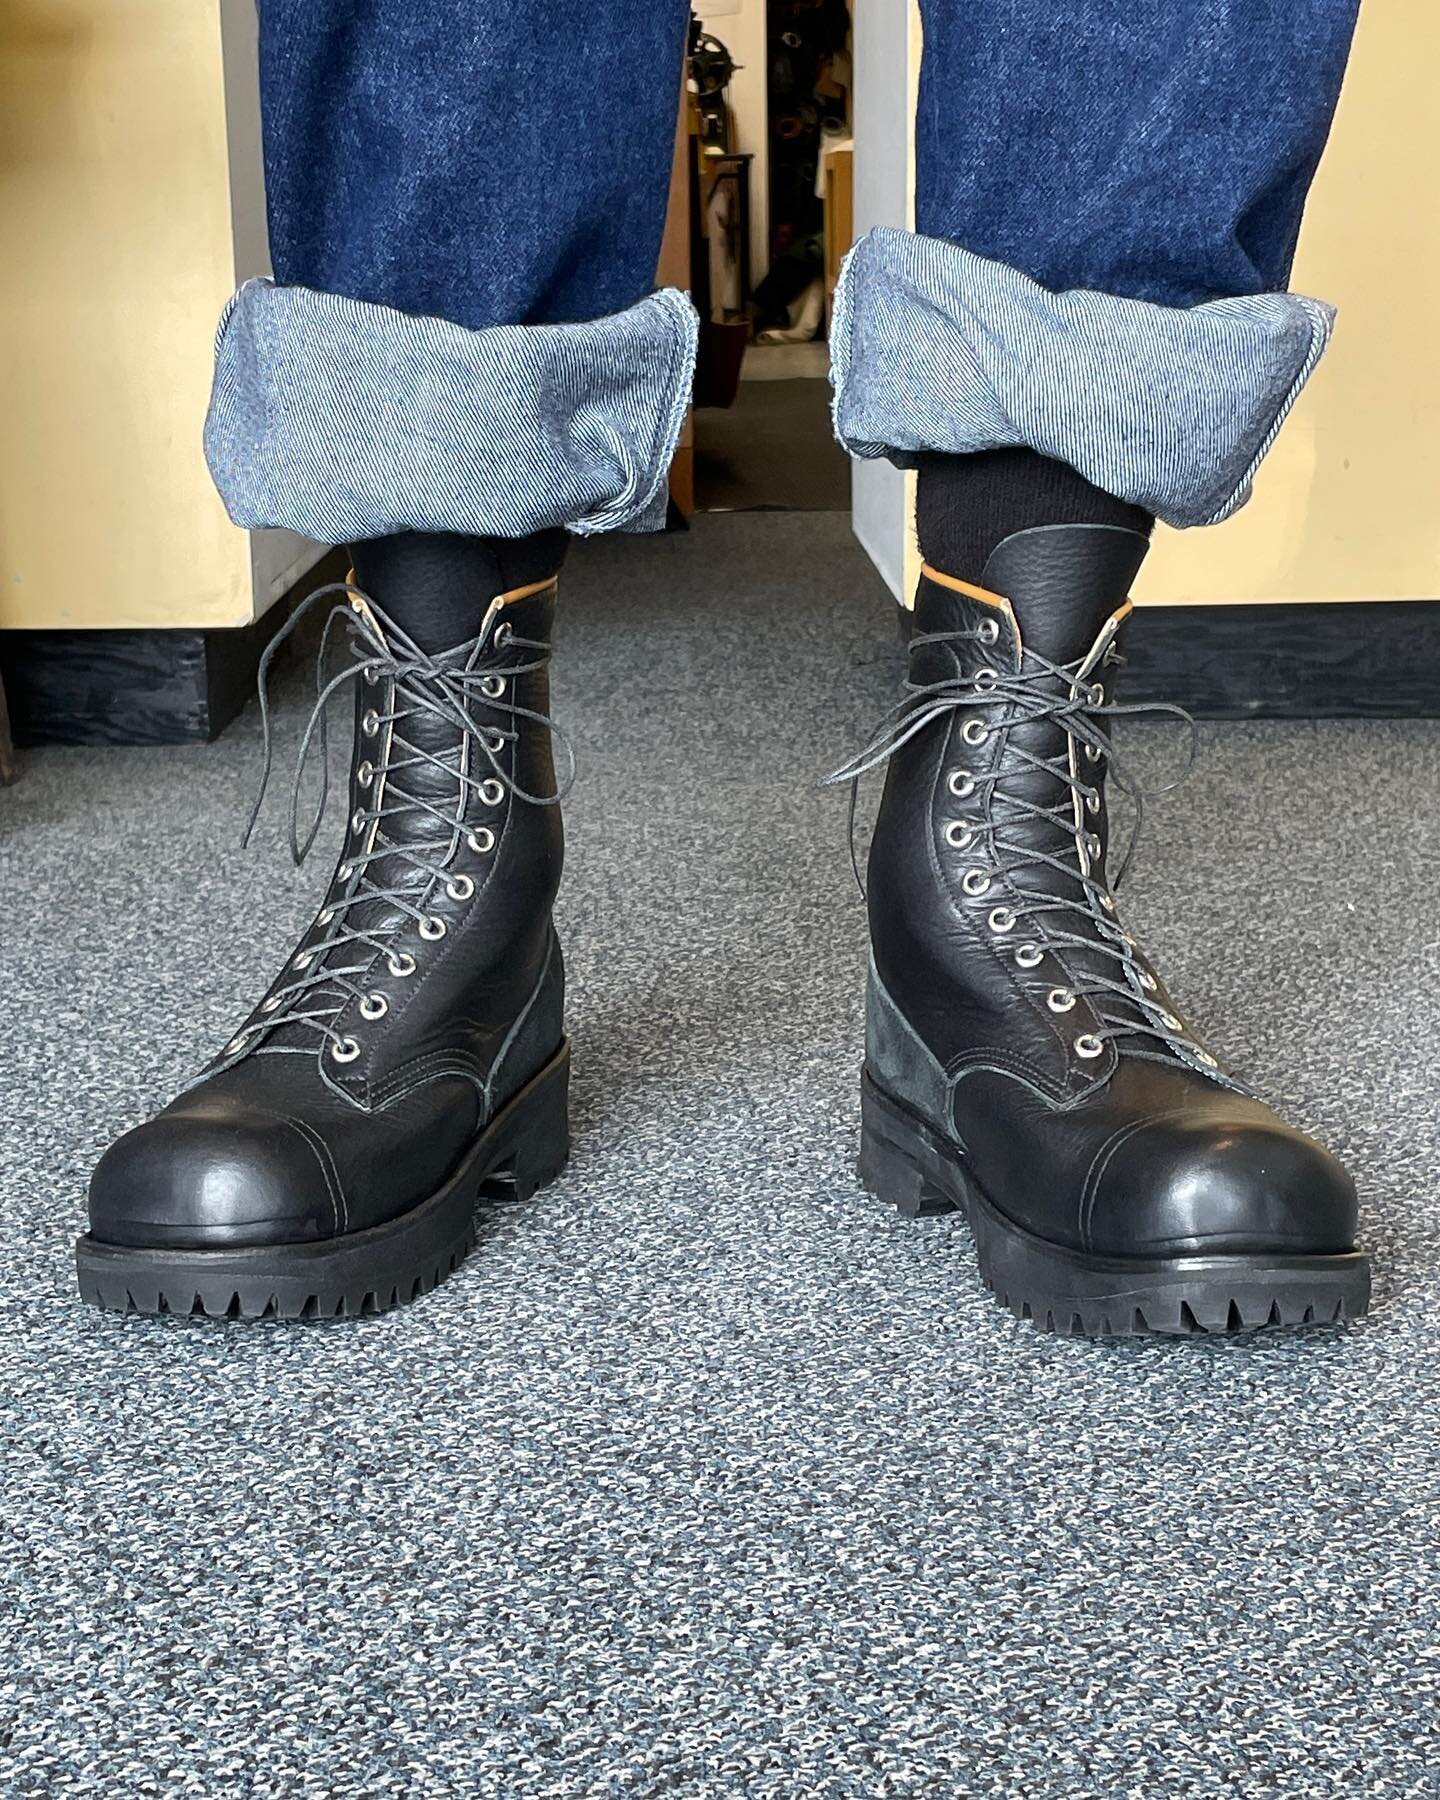 A typical production shoe will have one quarter pattern mirrored twice, simple. Custom boots can have up to 4 different quarter patterns, which makes a mess of the math. Here is a similar boot to the one prior, but for a very different foot.